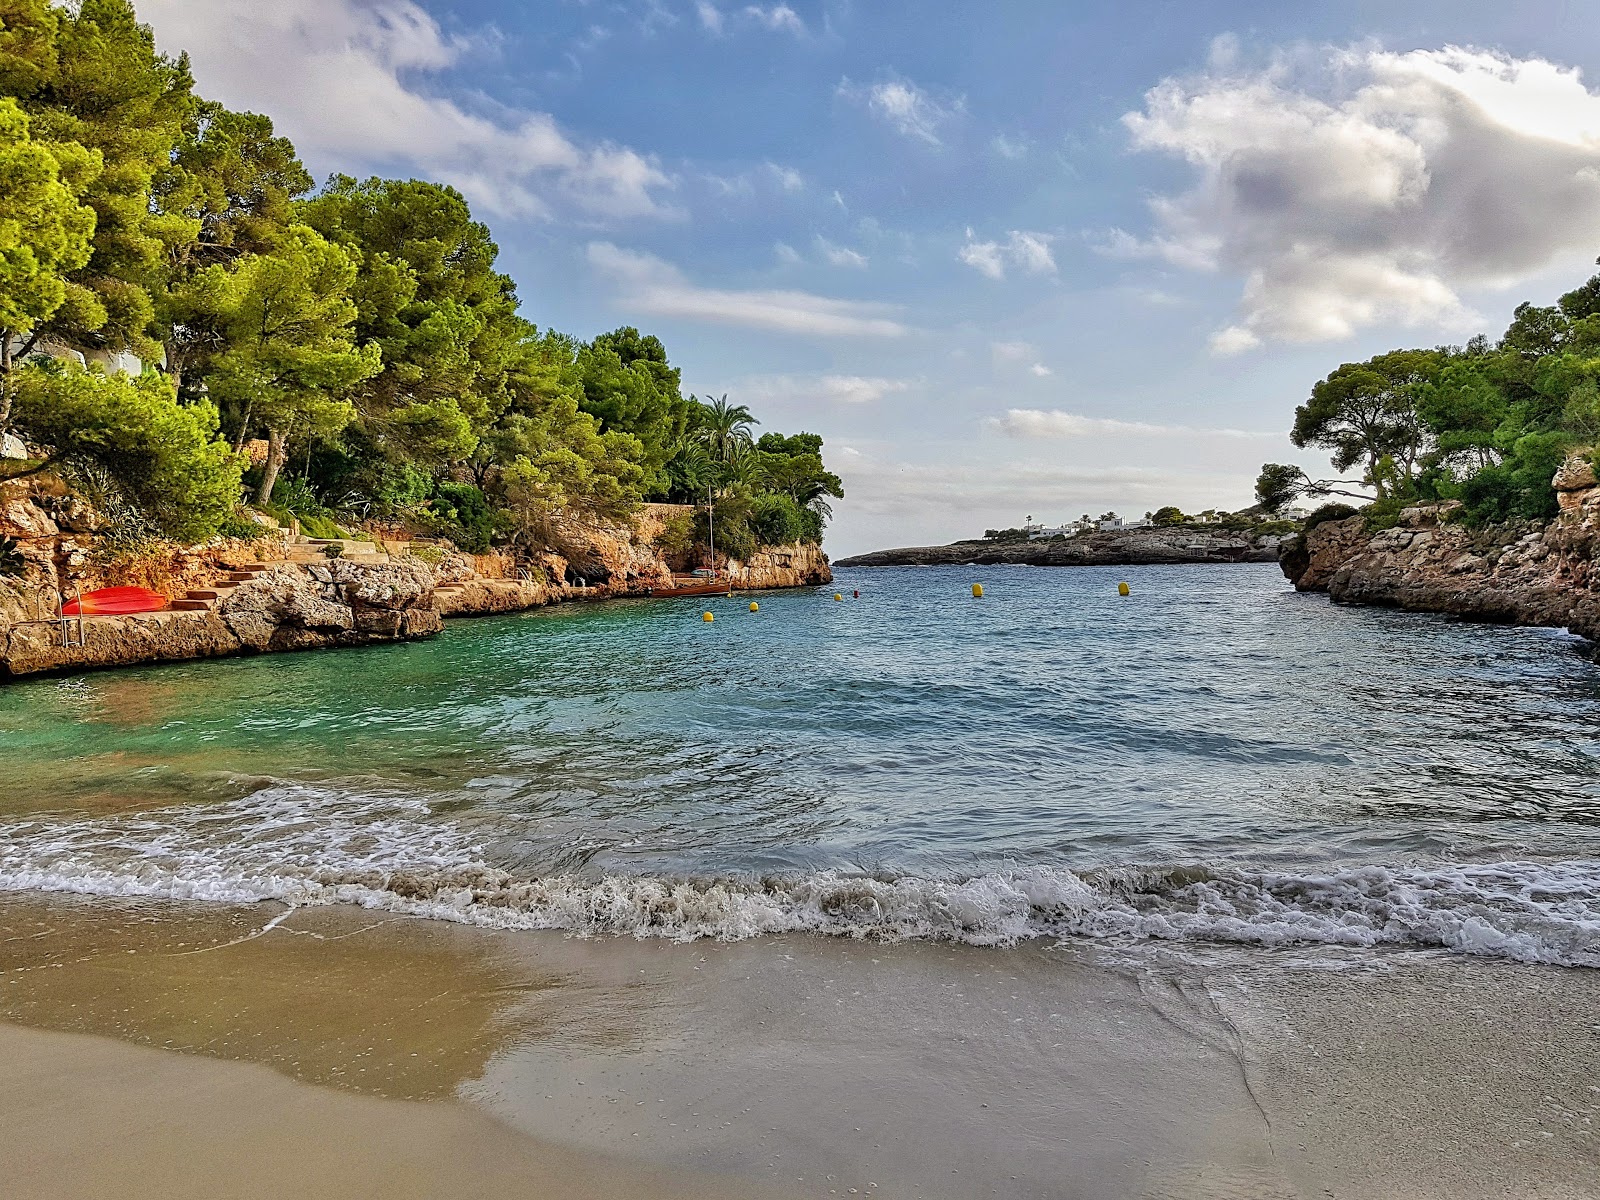 Rent a boat and visit the coves of Cala d'Or